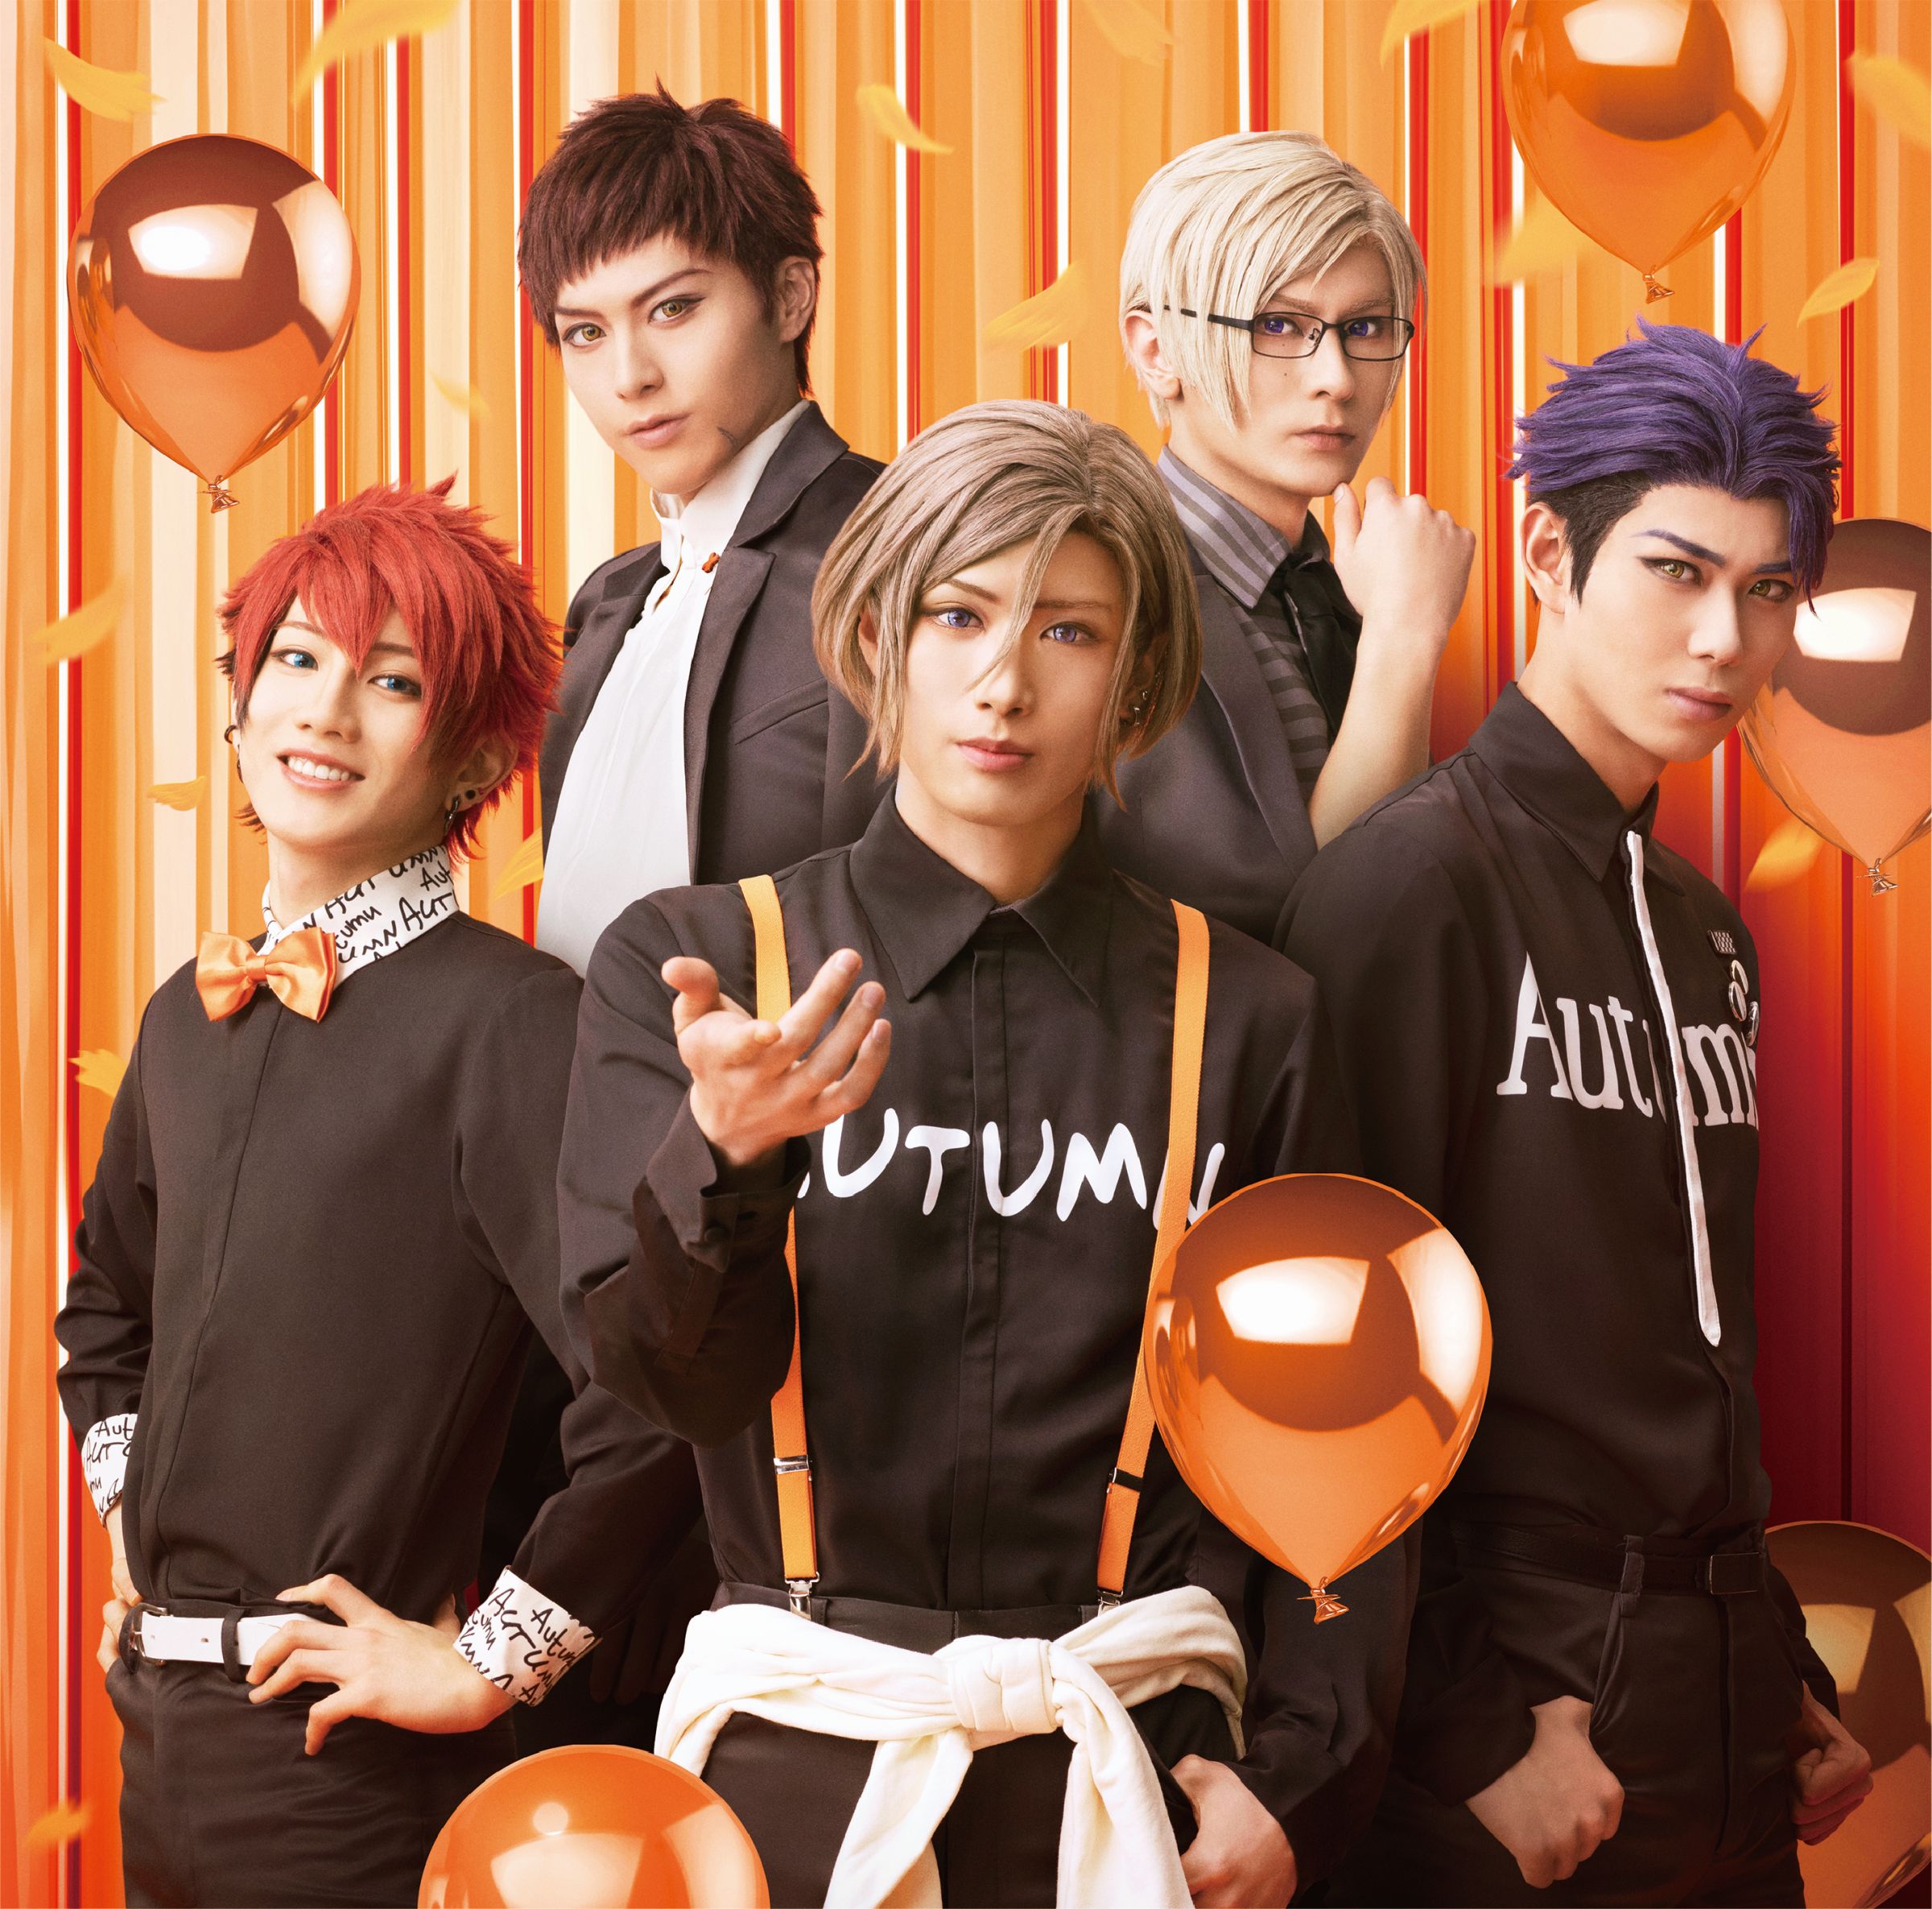 【MANKAI STAGE A3!】MANKAI STAGE A3! Autumn Troupe Cosmos≒Chaos(CD only) Release on OCt 13th 2021